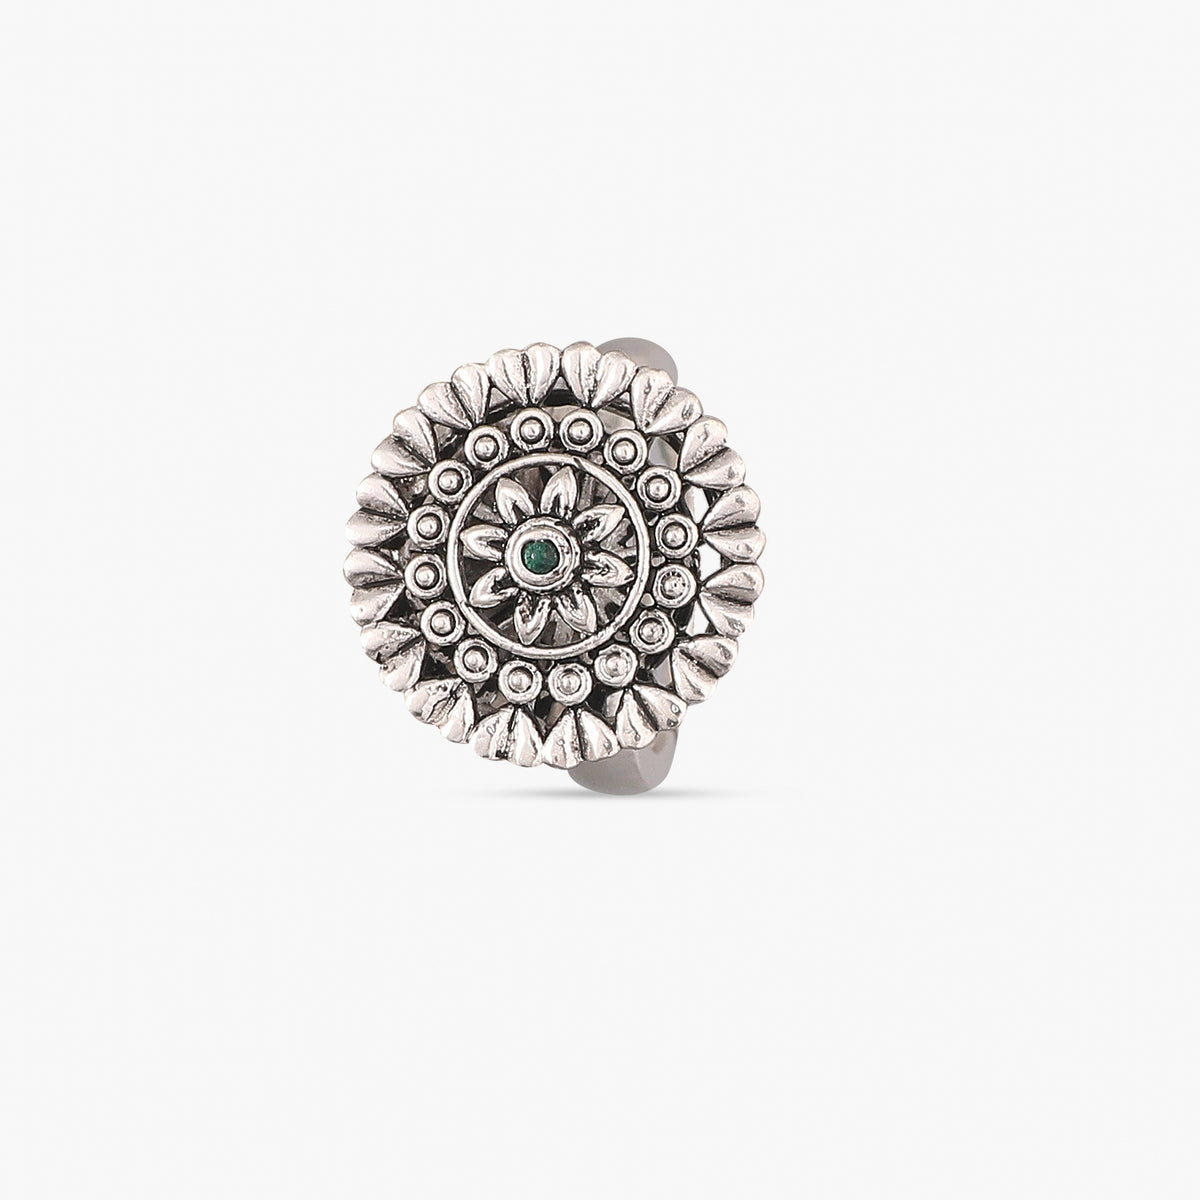 Maati Floral Antique Oxidized Ring